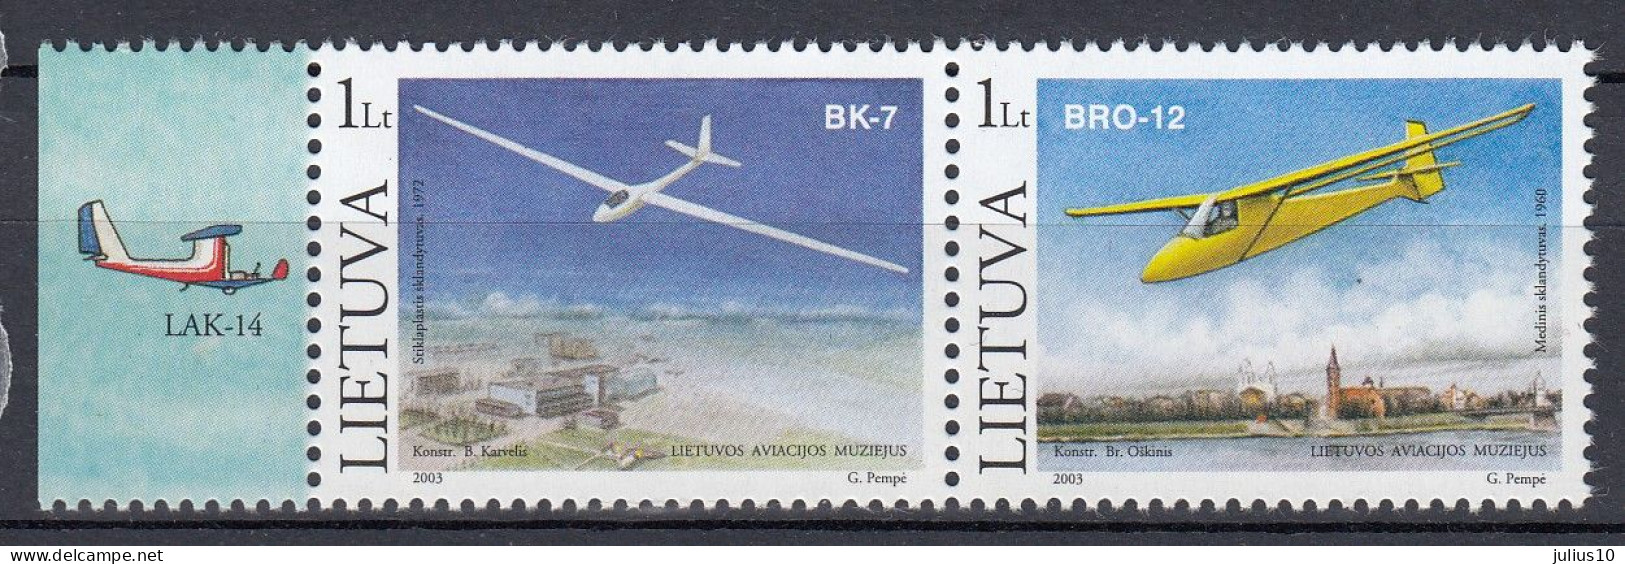 LITHUANIA 2003 Airplanes MNH(**) Mi 833-834 #Lt1012 - Airplanes